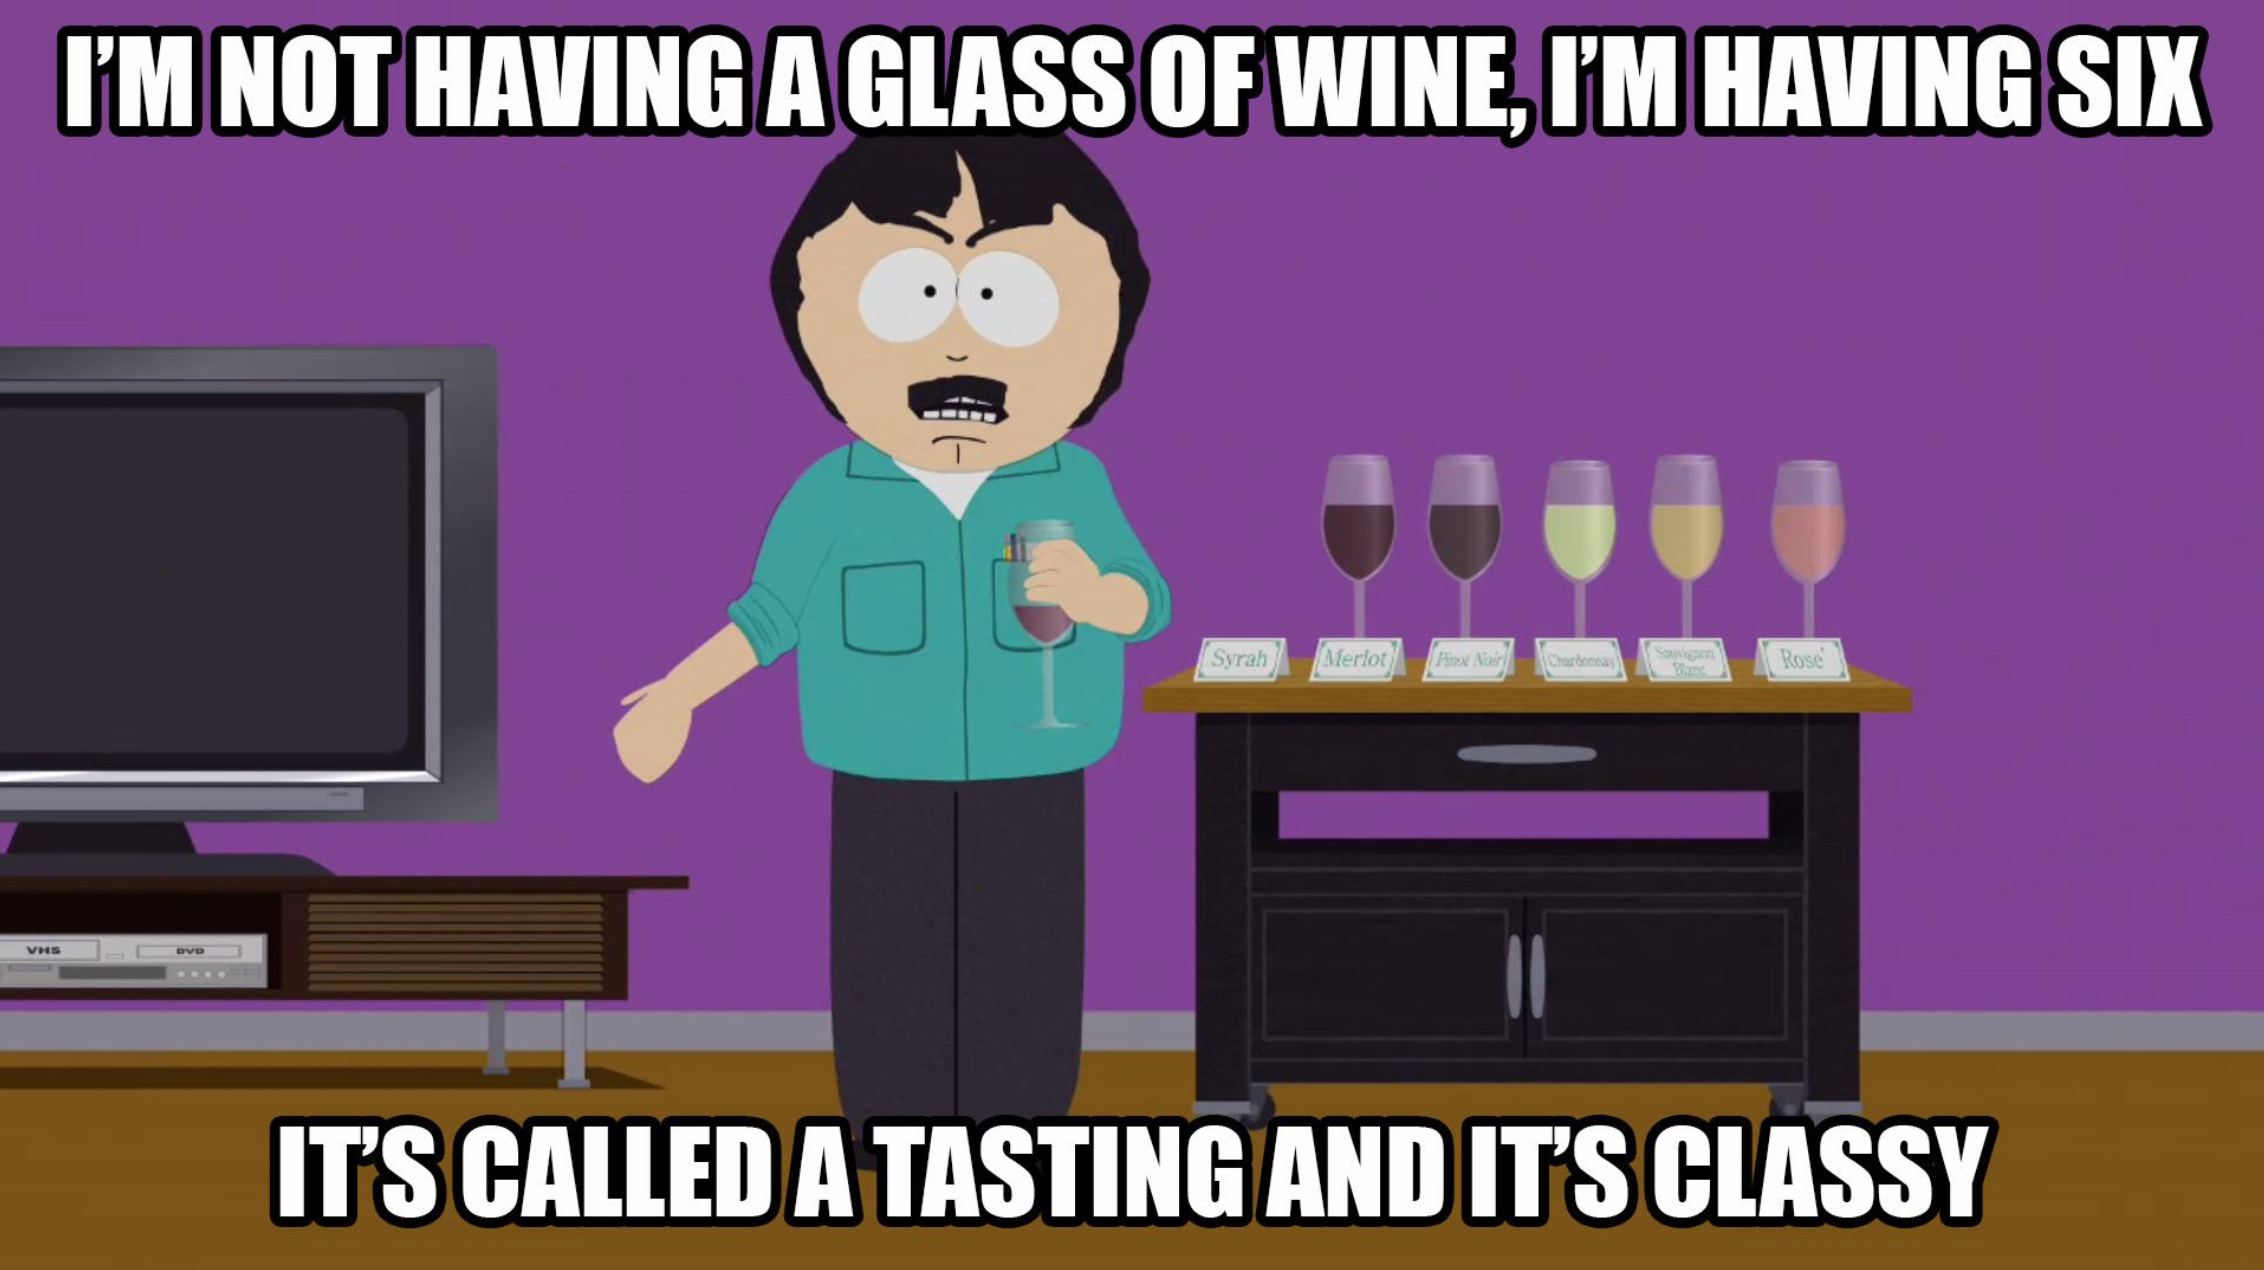 South Park's Randy Marsh says when you are bored at home have a wine tasting!